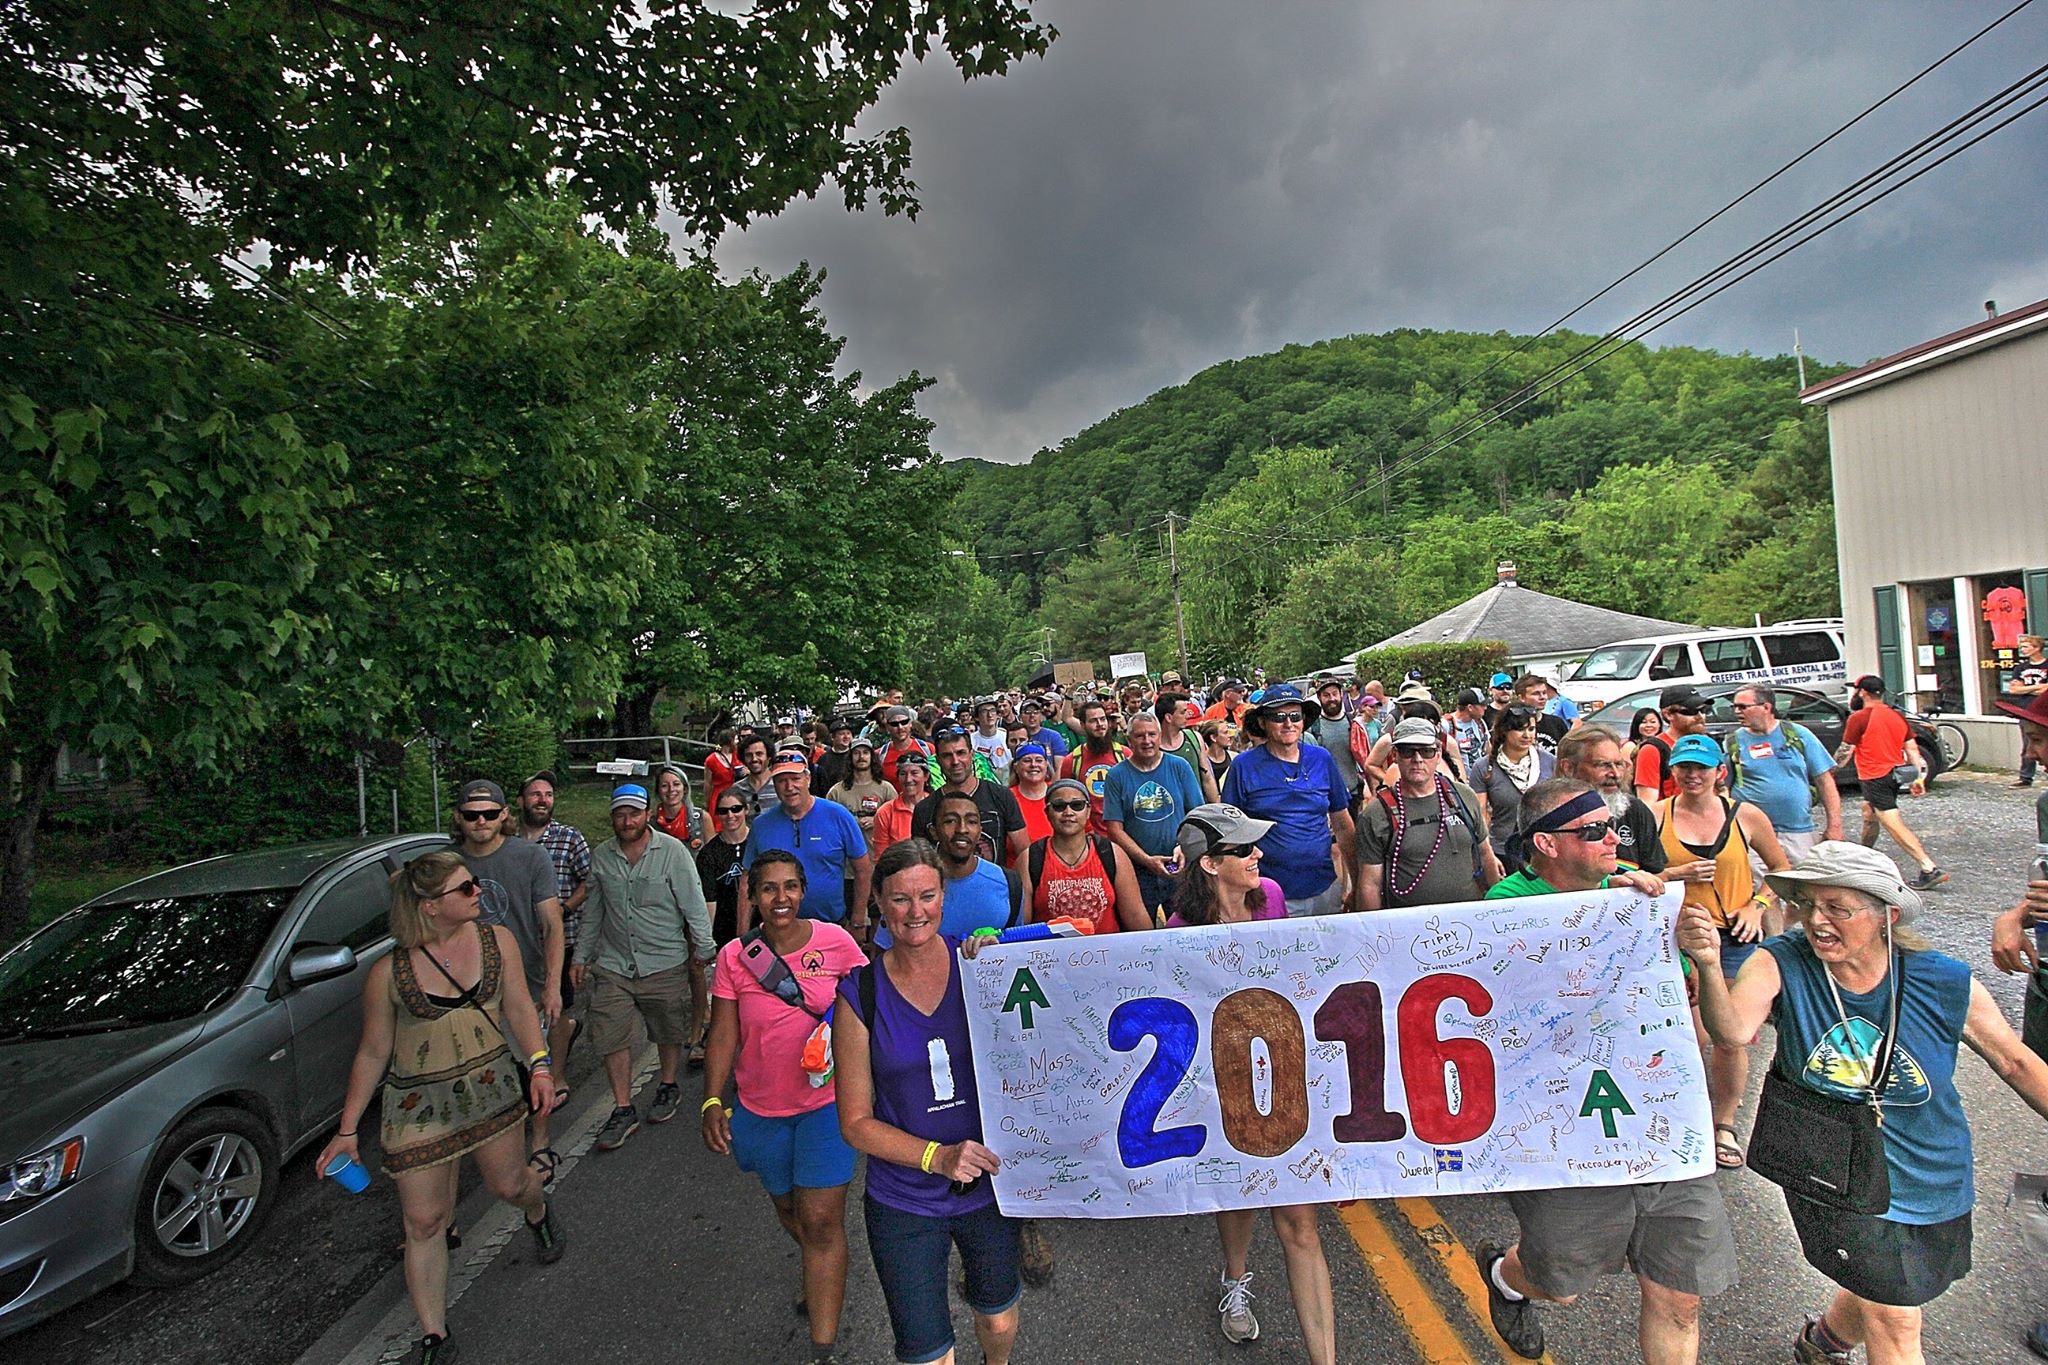 The 2016 Thru-Hiker Class Marches at Appalachian Trail Days in Damascus, Virginia. Photo by Moe Lemire.